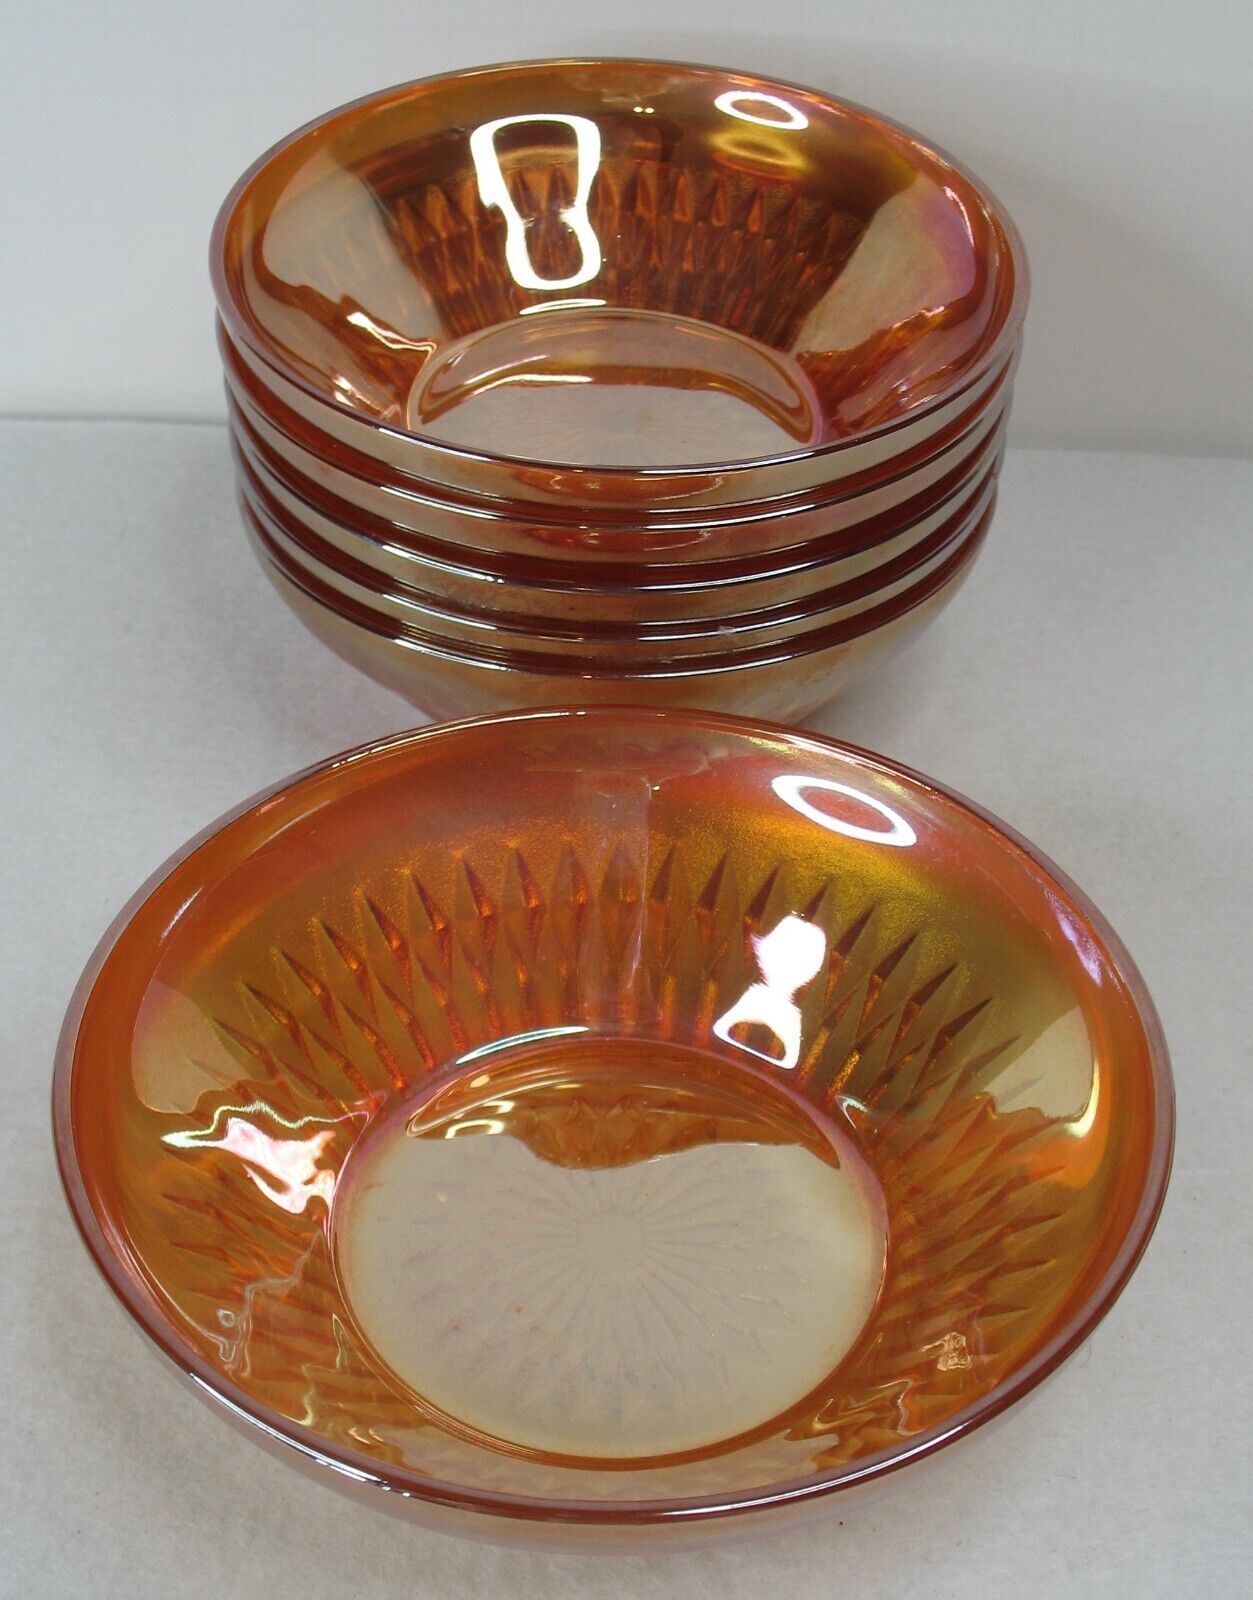 Jeanette Anniversary Iridescent Marigold Berry Fruit Bowl 1950s /60s Set of 6